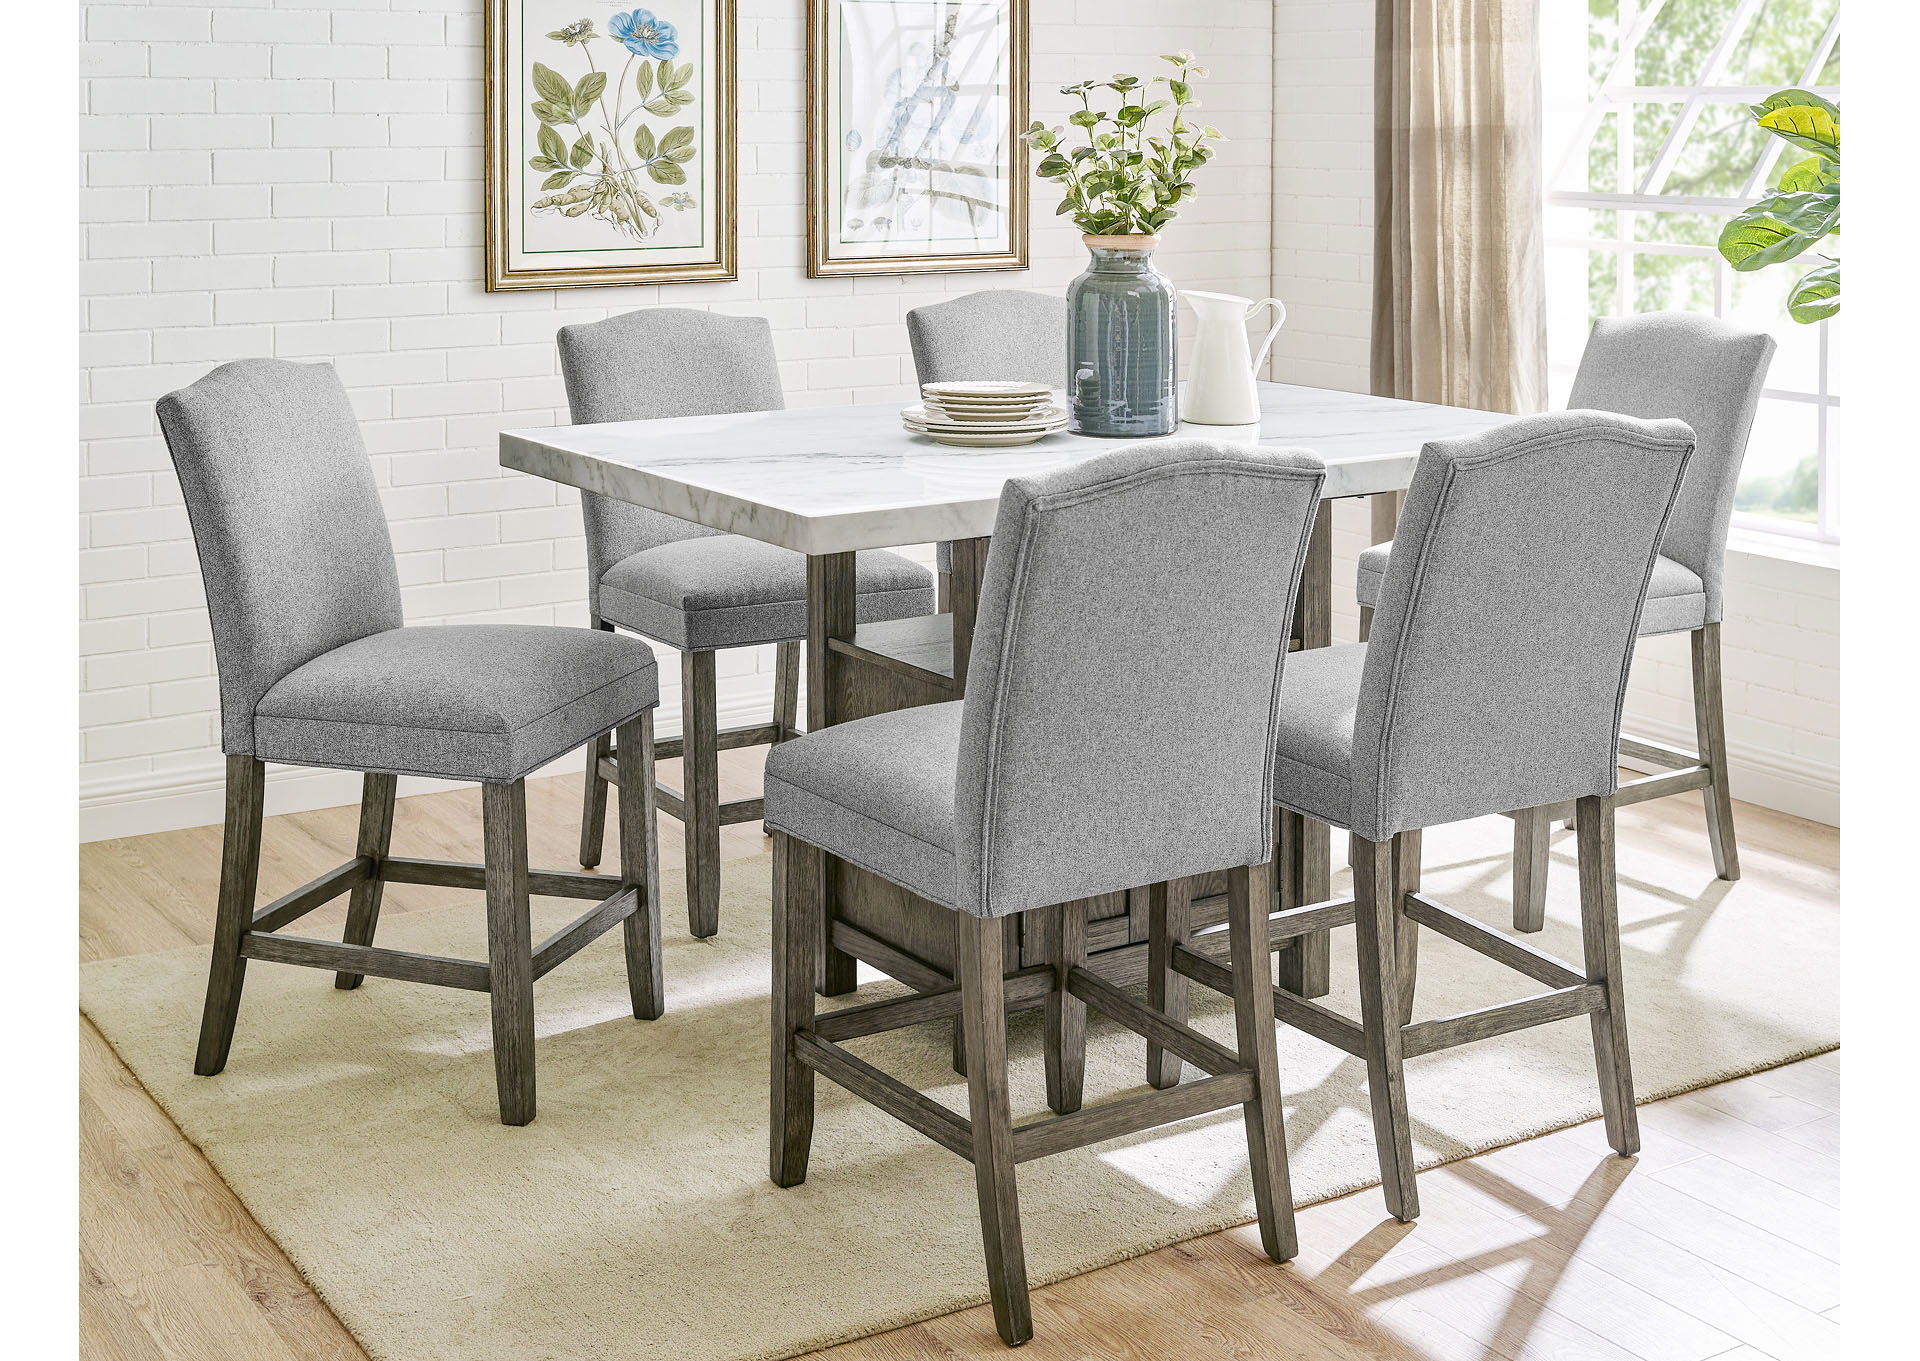 Grayson Grey Marble Top Counter Dining Set W/ 6 Chairs,Steve Silver